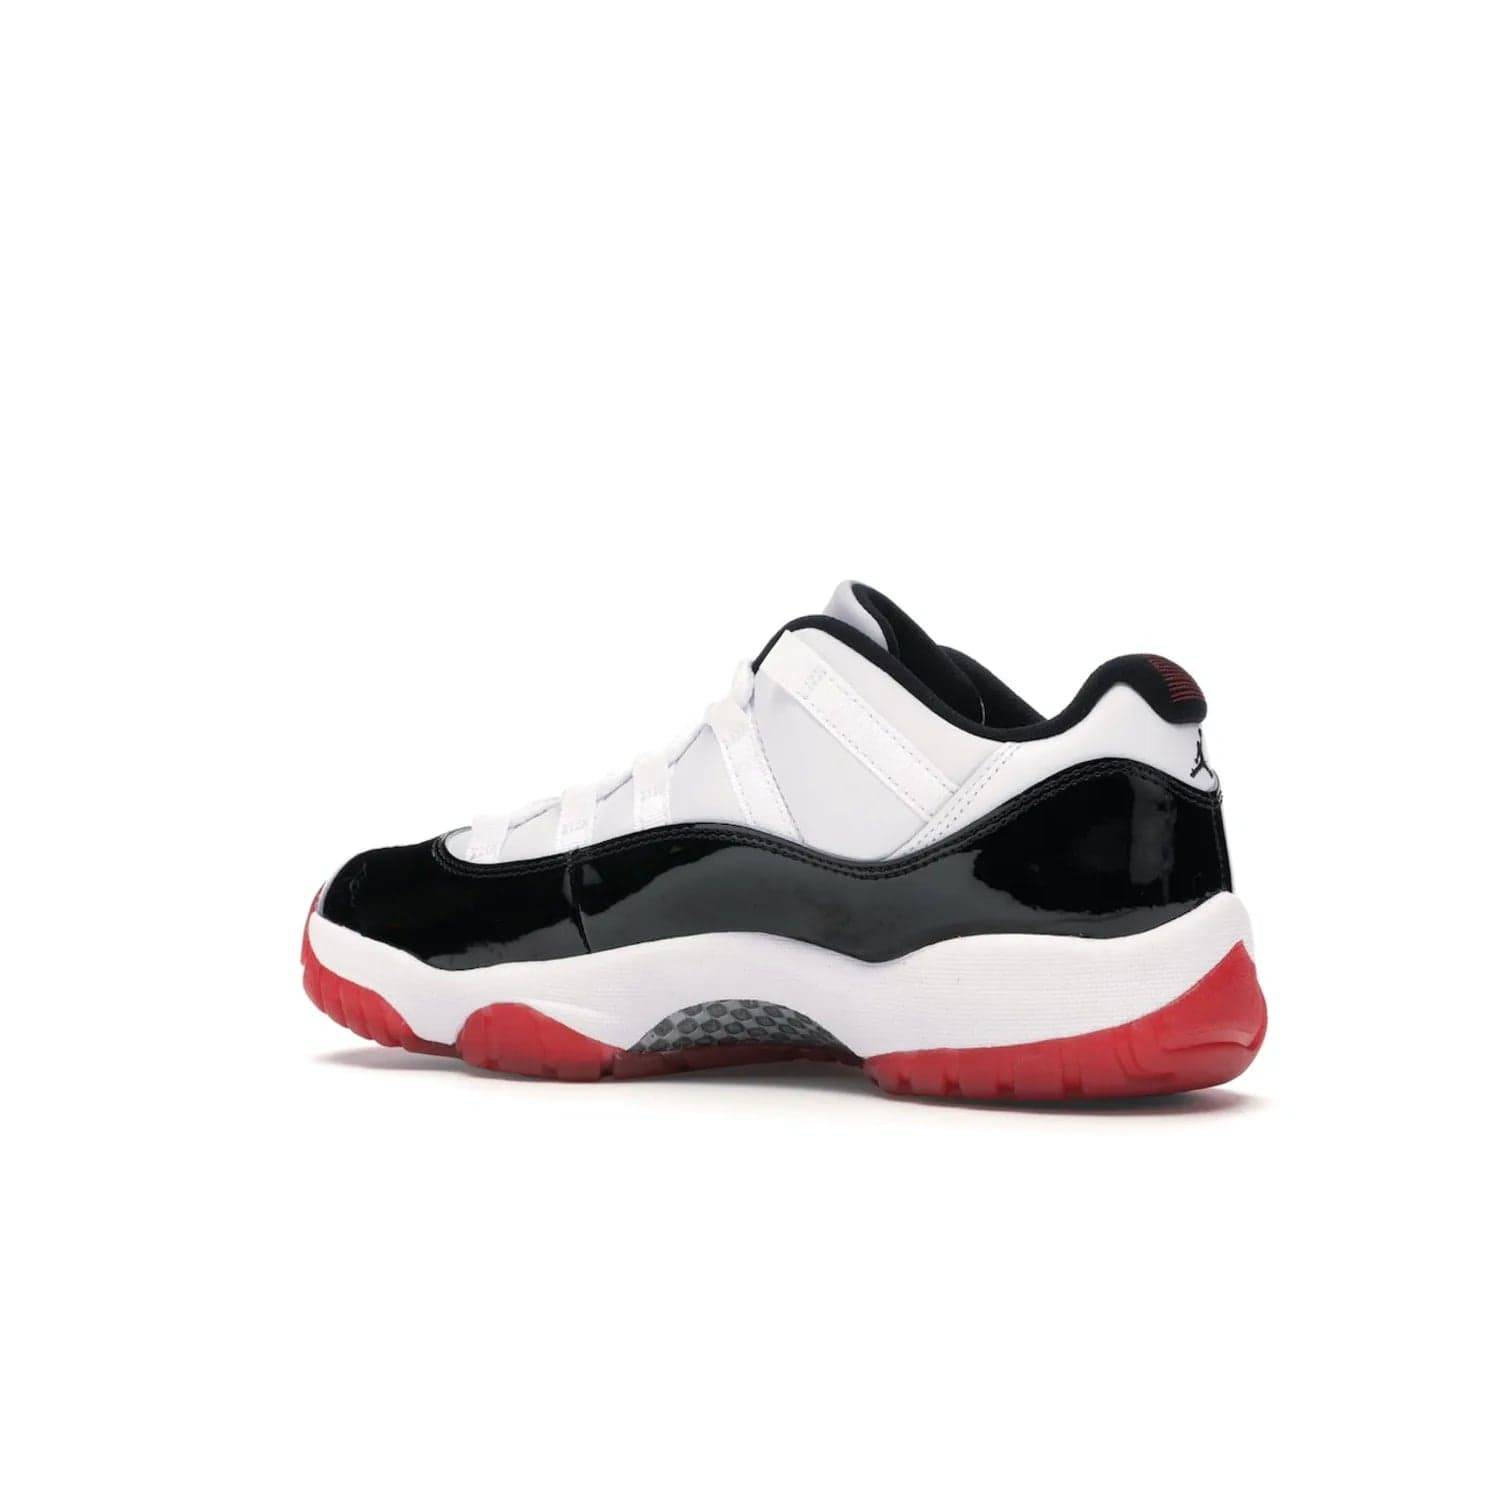 Jordan 11 Retro Low Concord Bred - Image 22 - Only at www.BallersClubKickz.com - Grab the classic Jordan 11 look with the Jordan 11 Retro Low Concord Bred. With white and black elements and the iconic red outsole of the Jordan 11 Bred, you won't miss a beat. Released in June 2020, the perfect complement to any outfit.